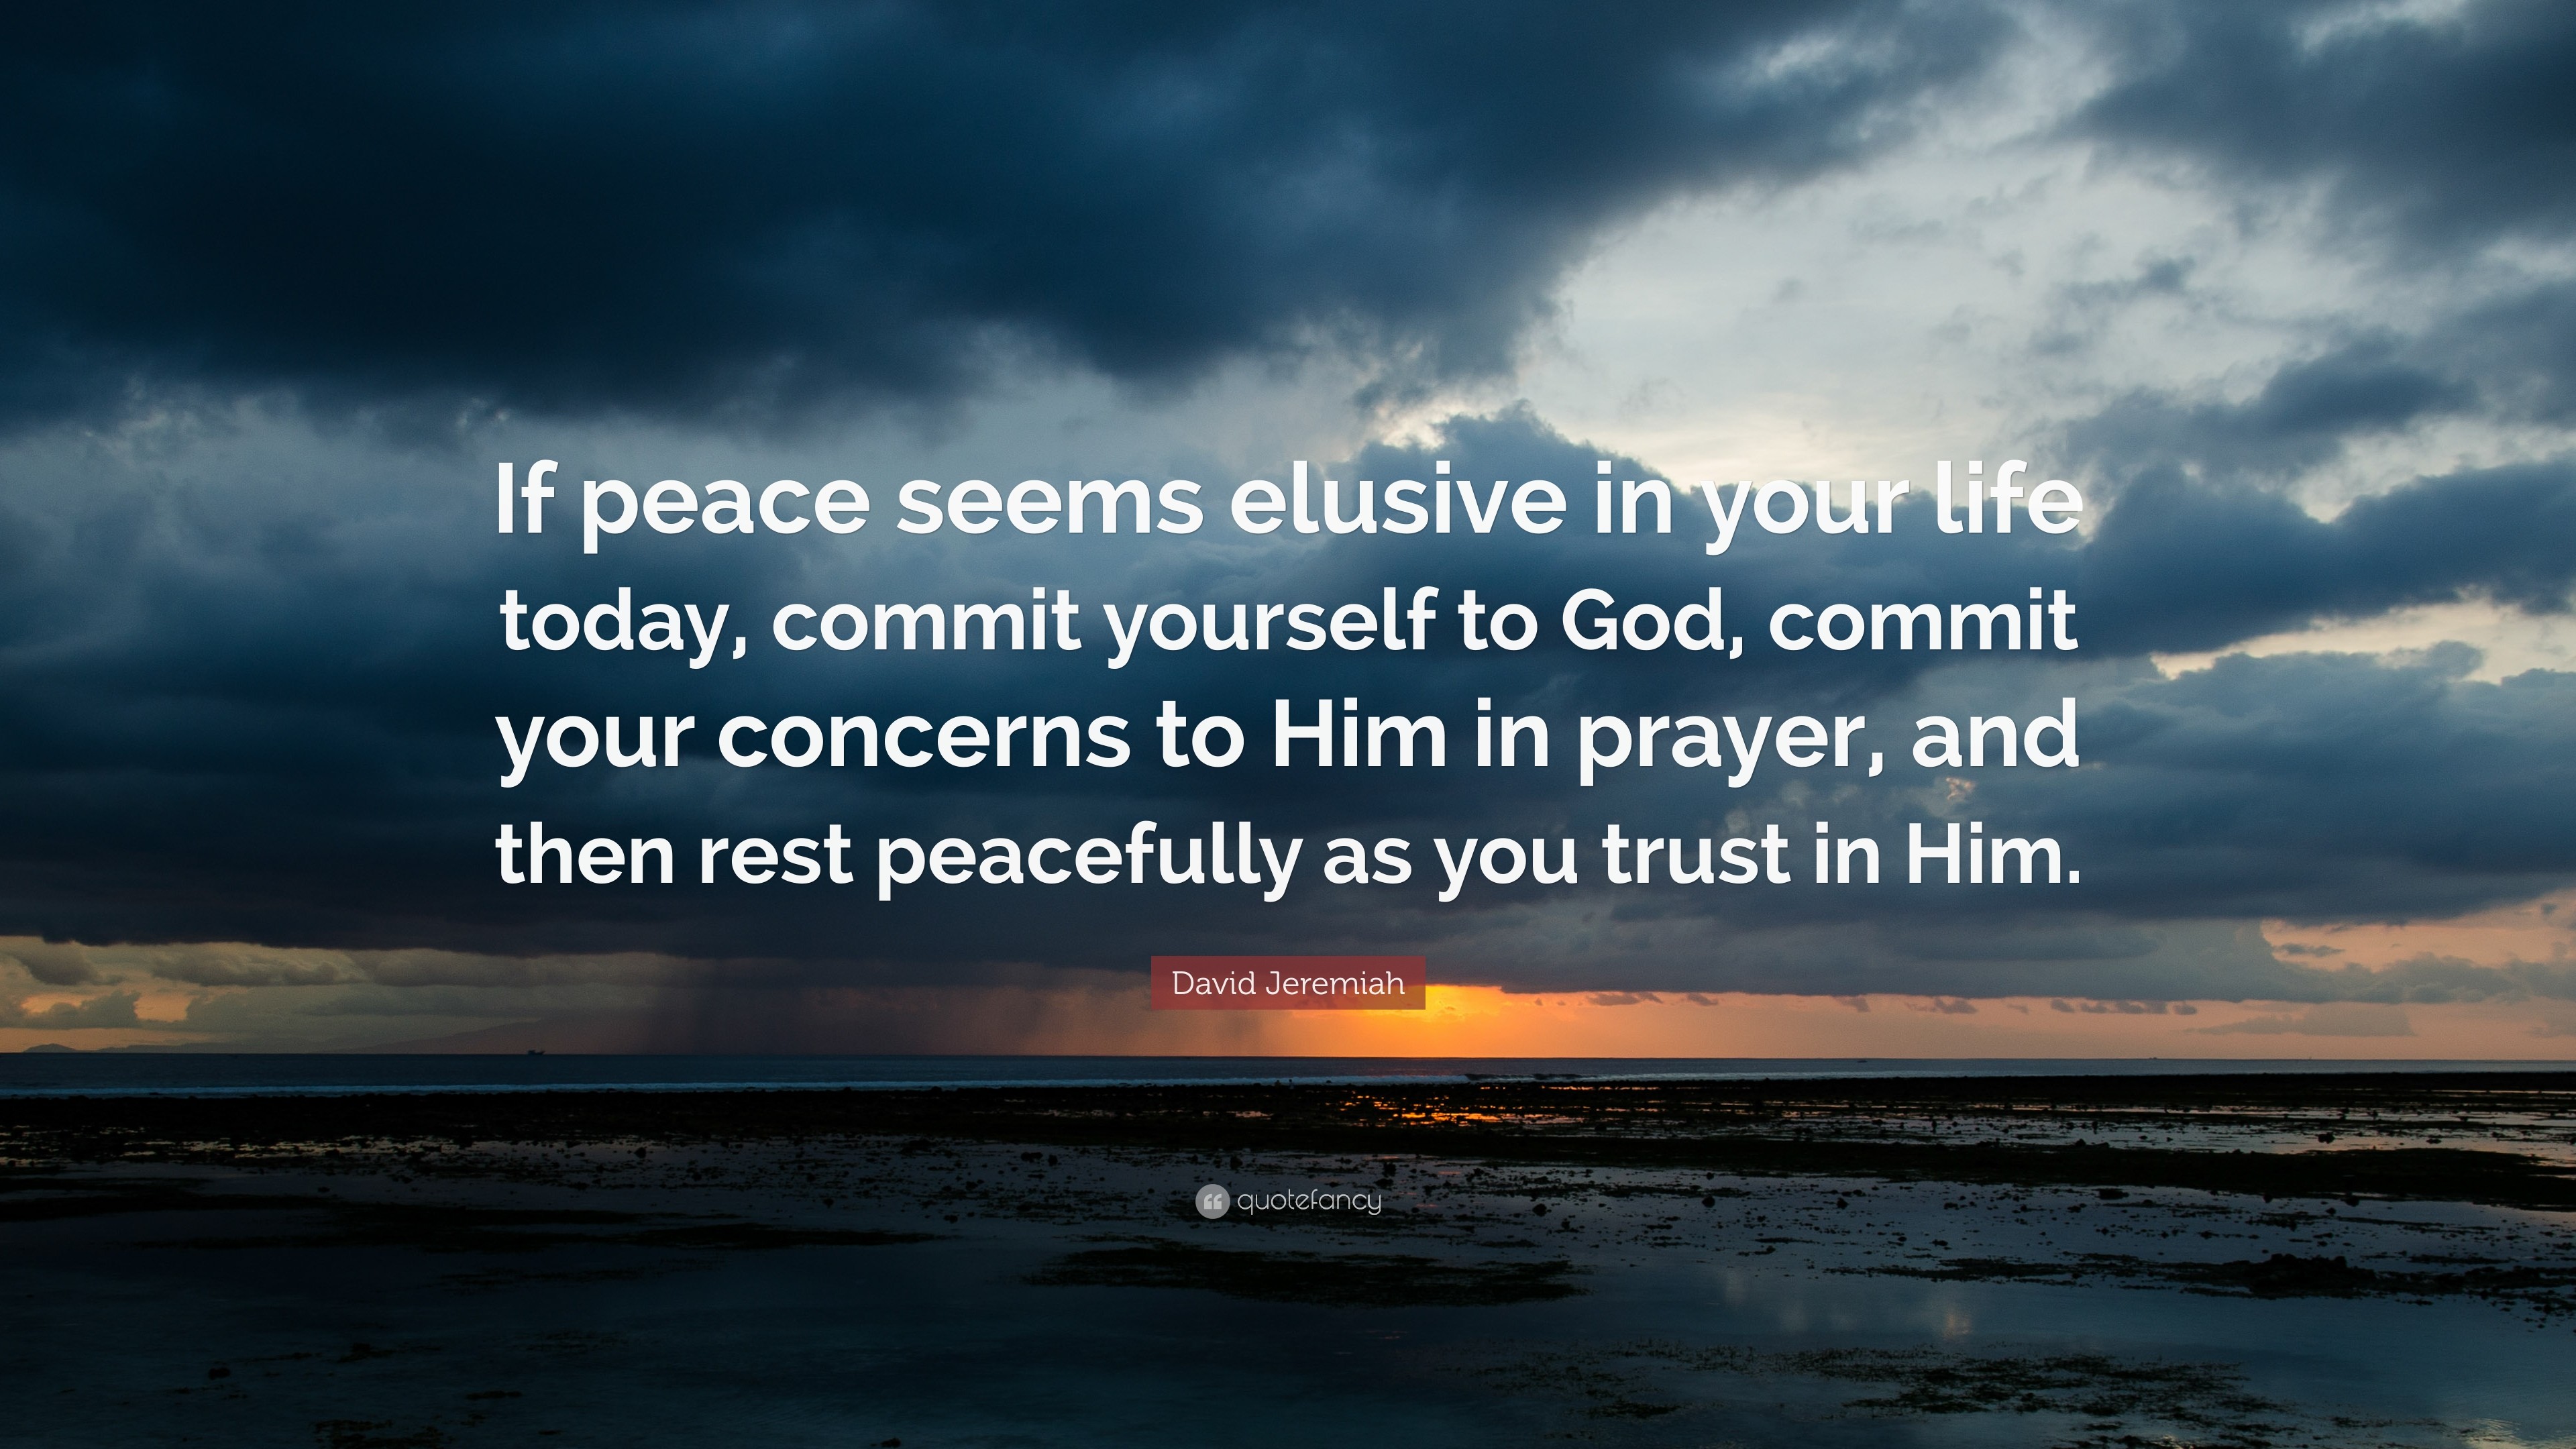 3840x2160 David Jeremiah Quote: “If peace seems elusive in your life today, commit  yourself